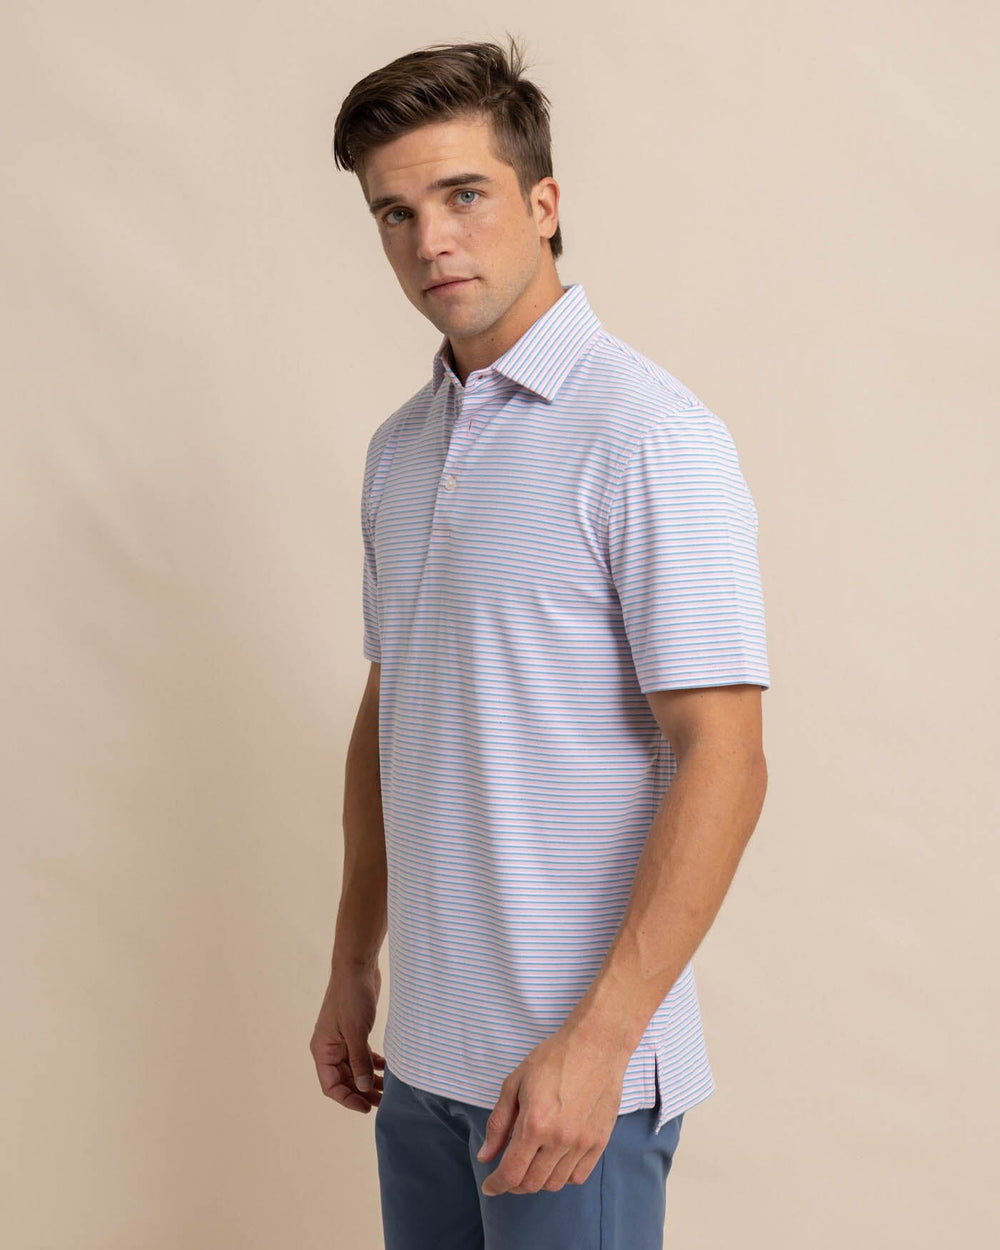 The front view of the Southern Tide Ryder Heather Halls Performance Polo by Southern Tide - Heather Pale Rosette Pink